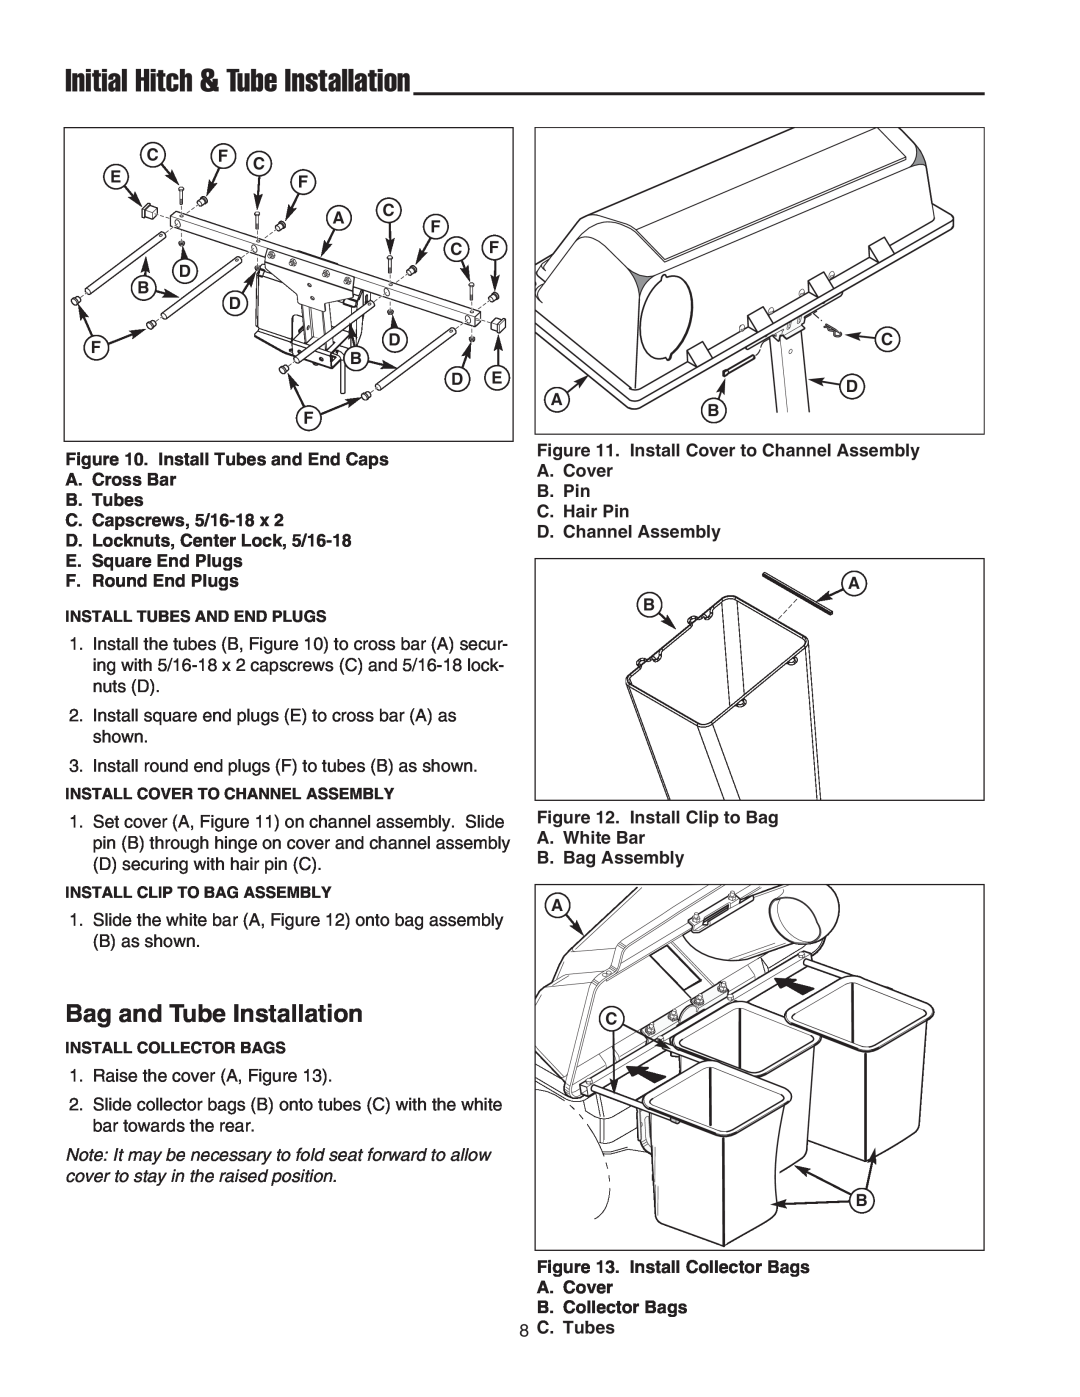 Simplicity 1694918 manual Initial Hitch & Tube Installation, Bag and Tube Installation 